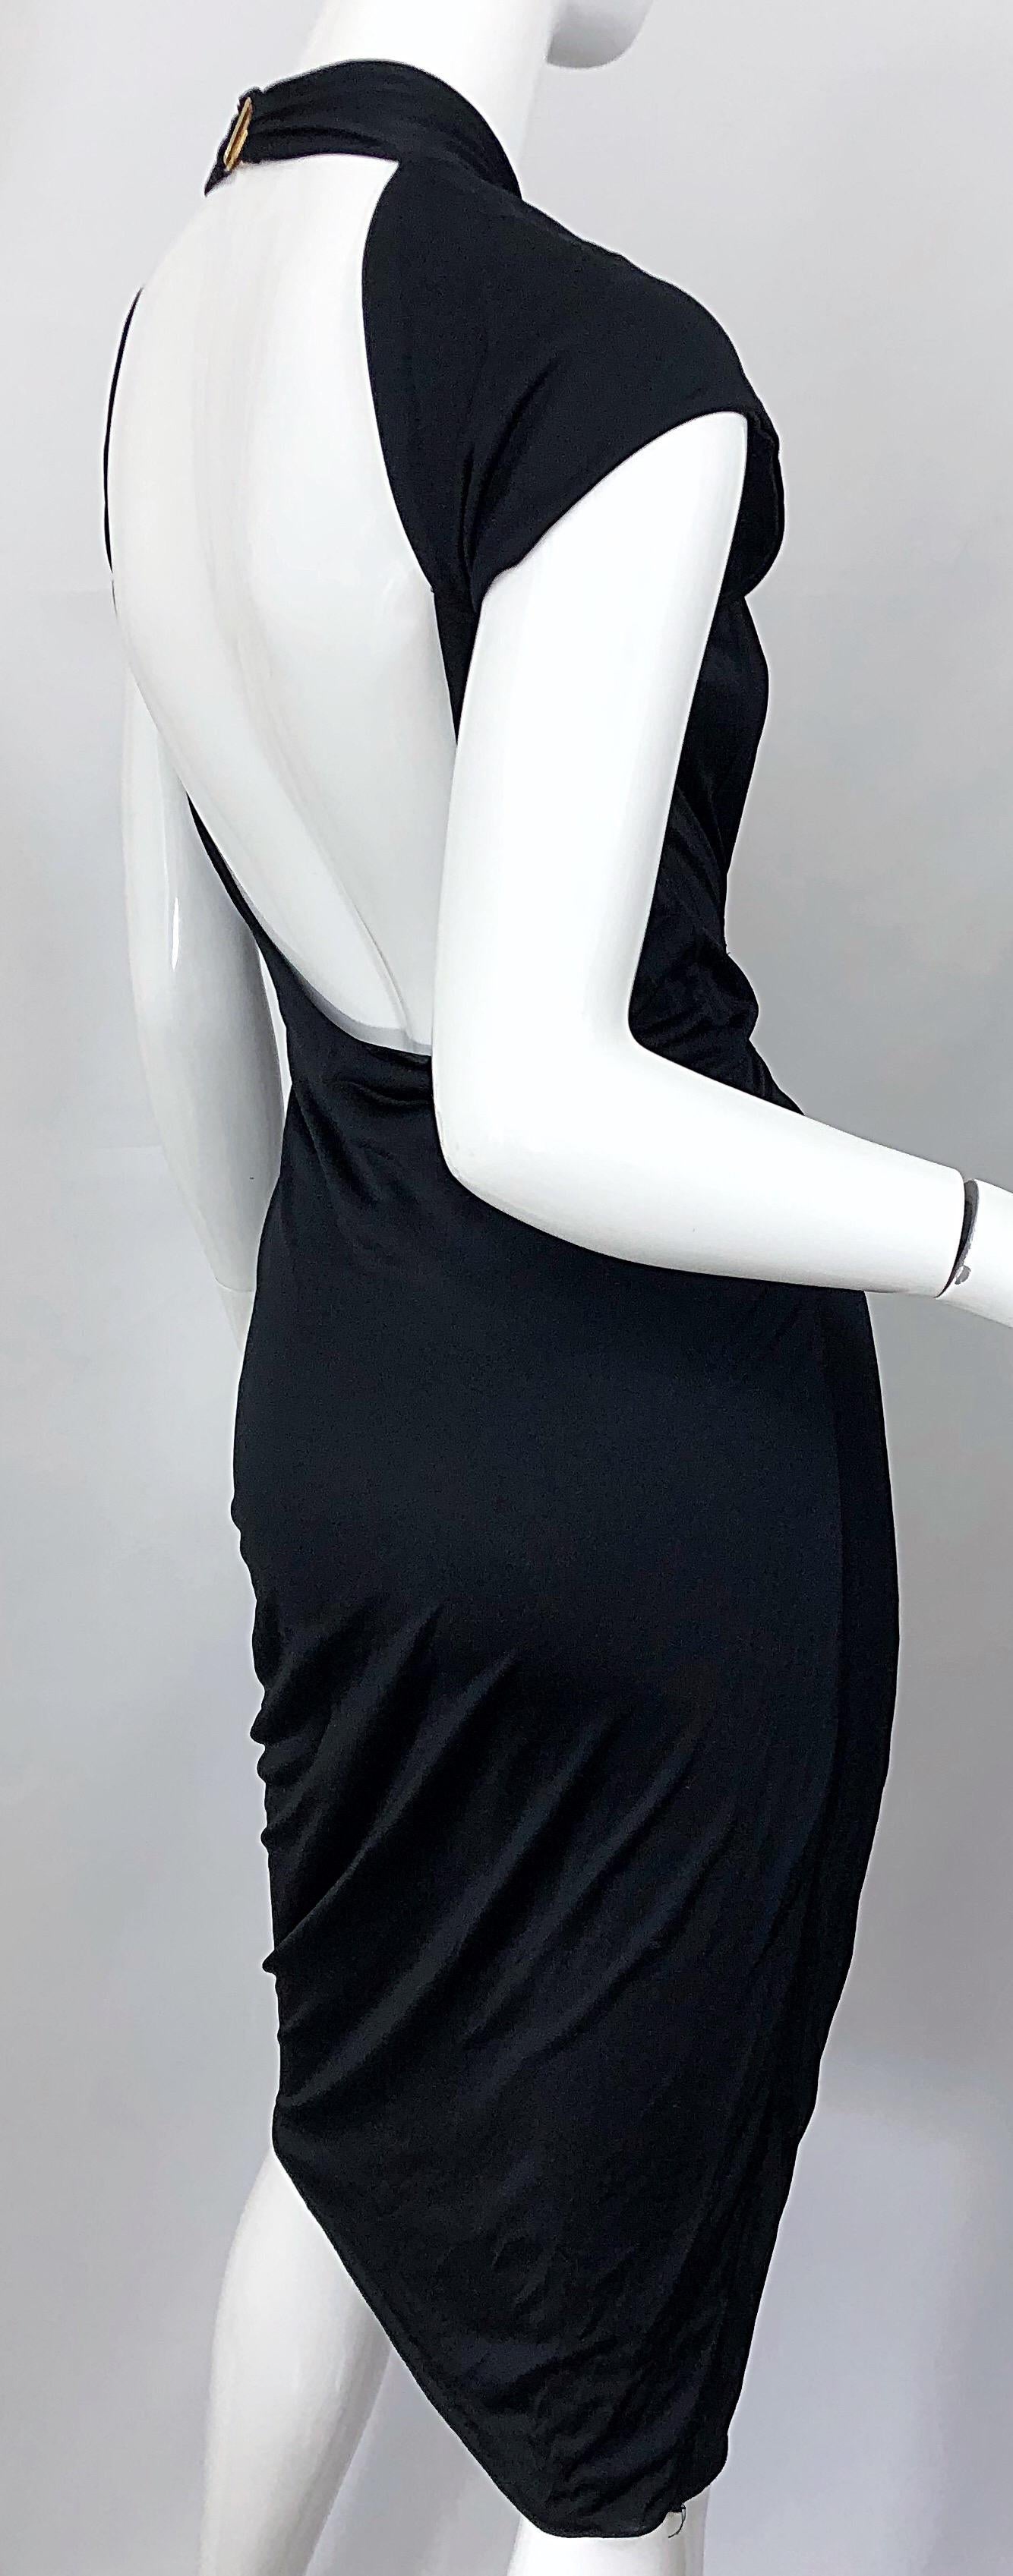 Gucci Tom Ford Fall 2003 Runway Black Cut Out Backless Stretch Jersey Dress  1